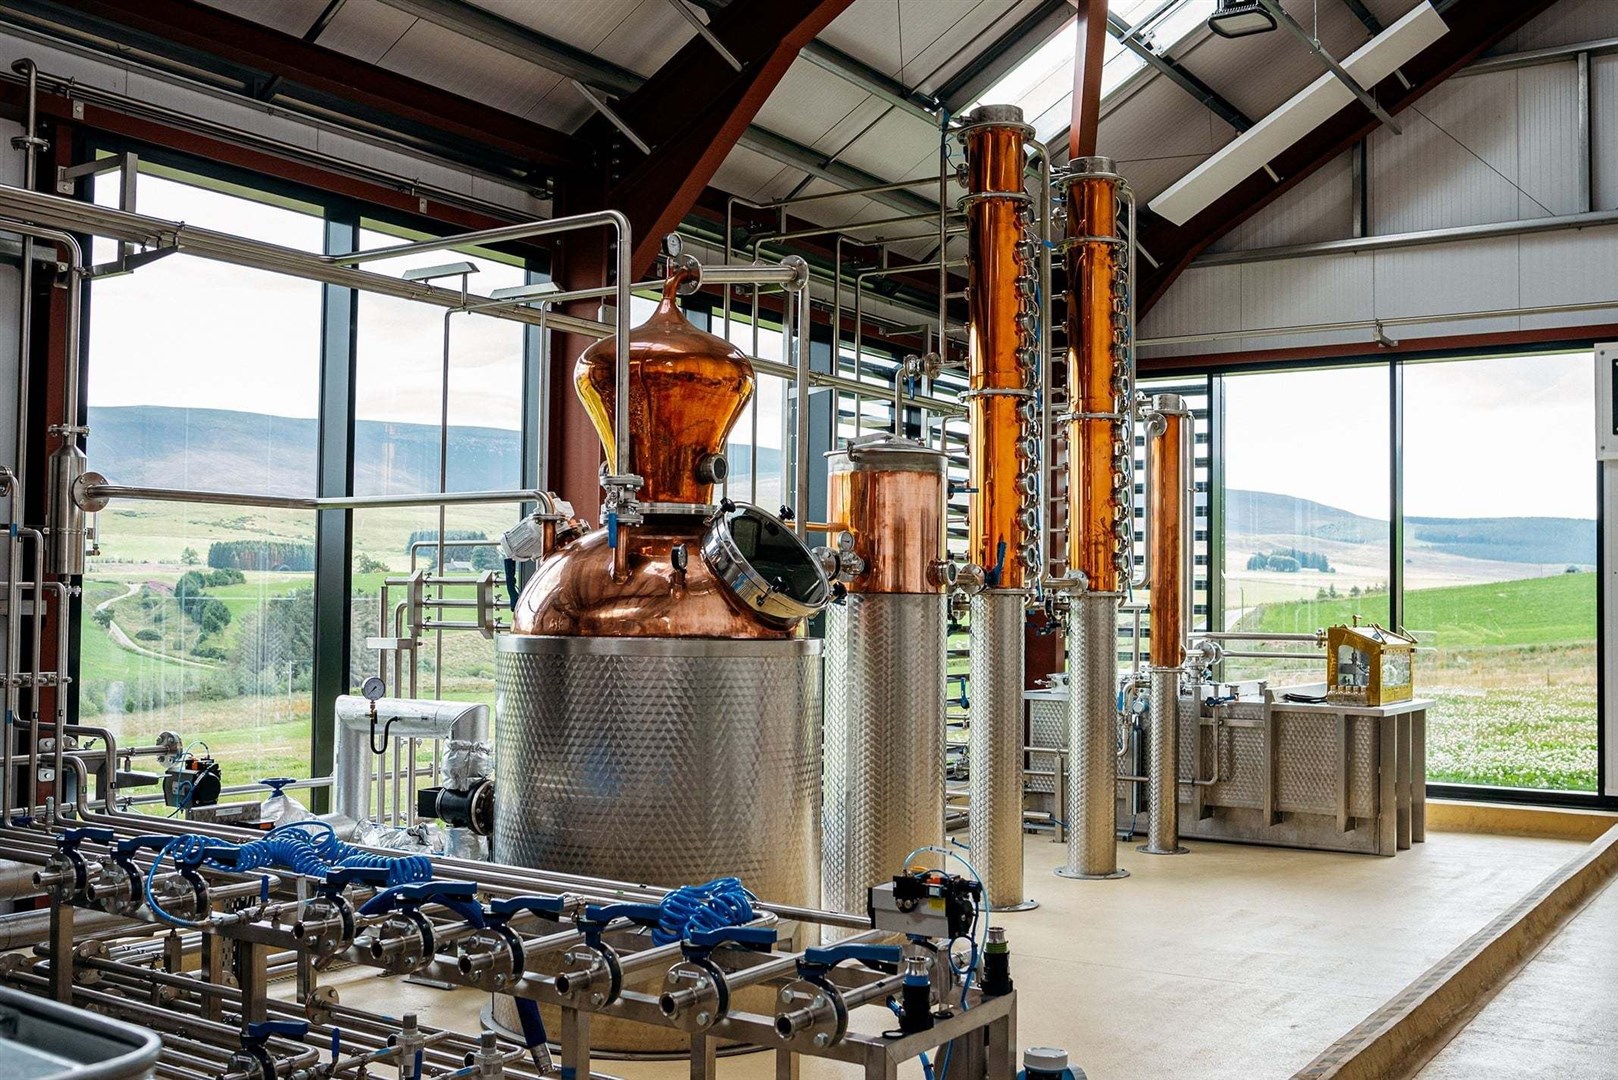 Whisky is one of the legendary local products being promoted as part of the trail...Picture: Glenrinnes Distillery